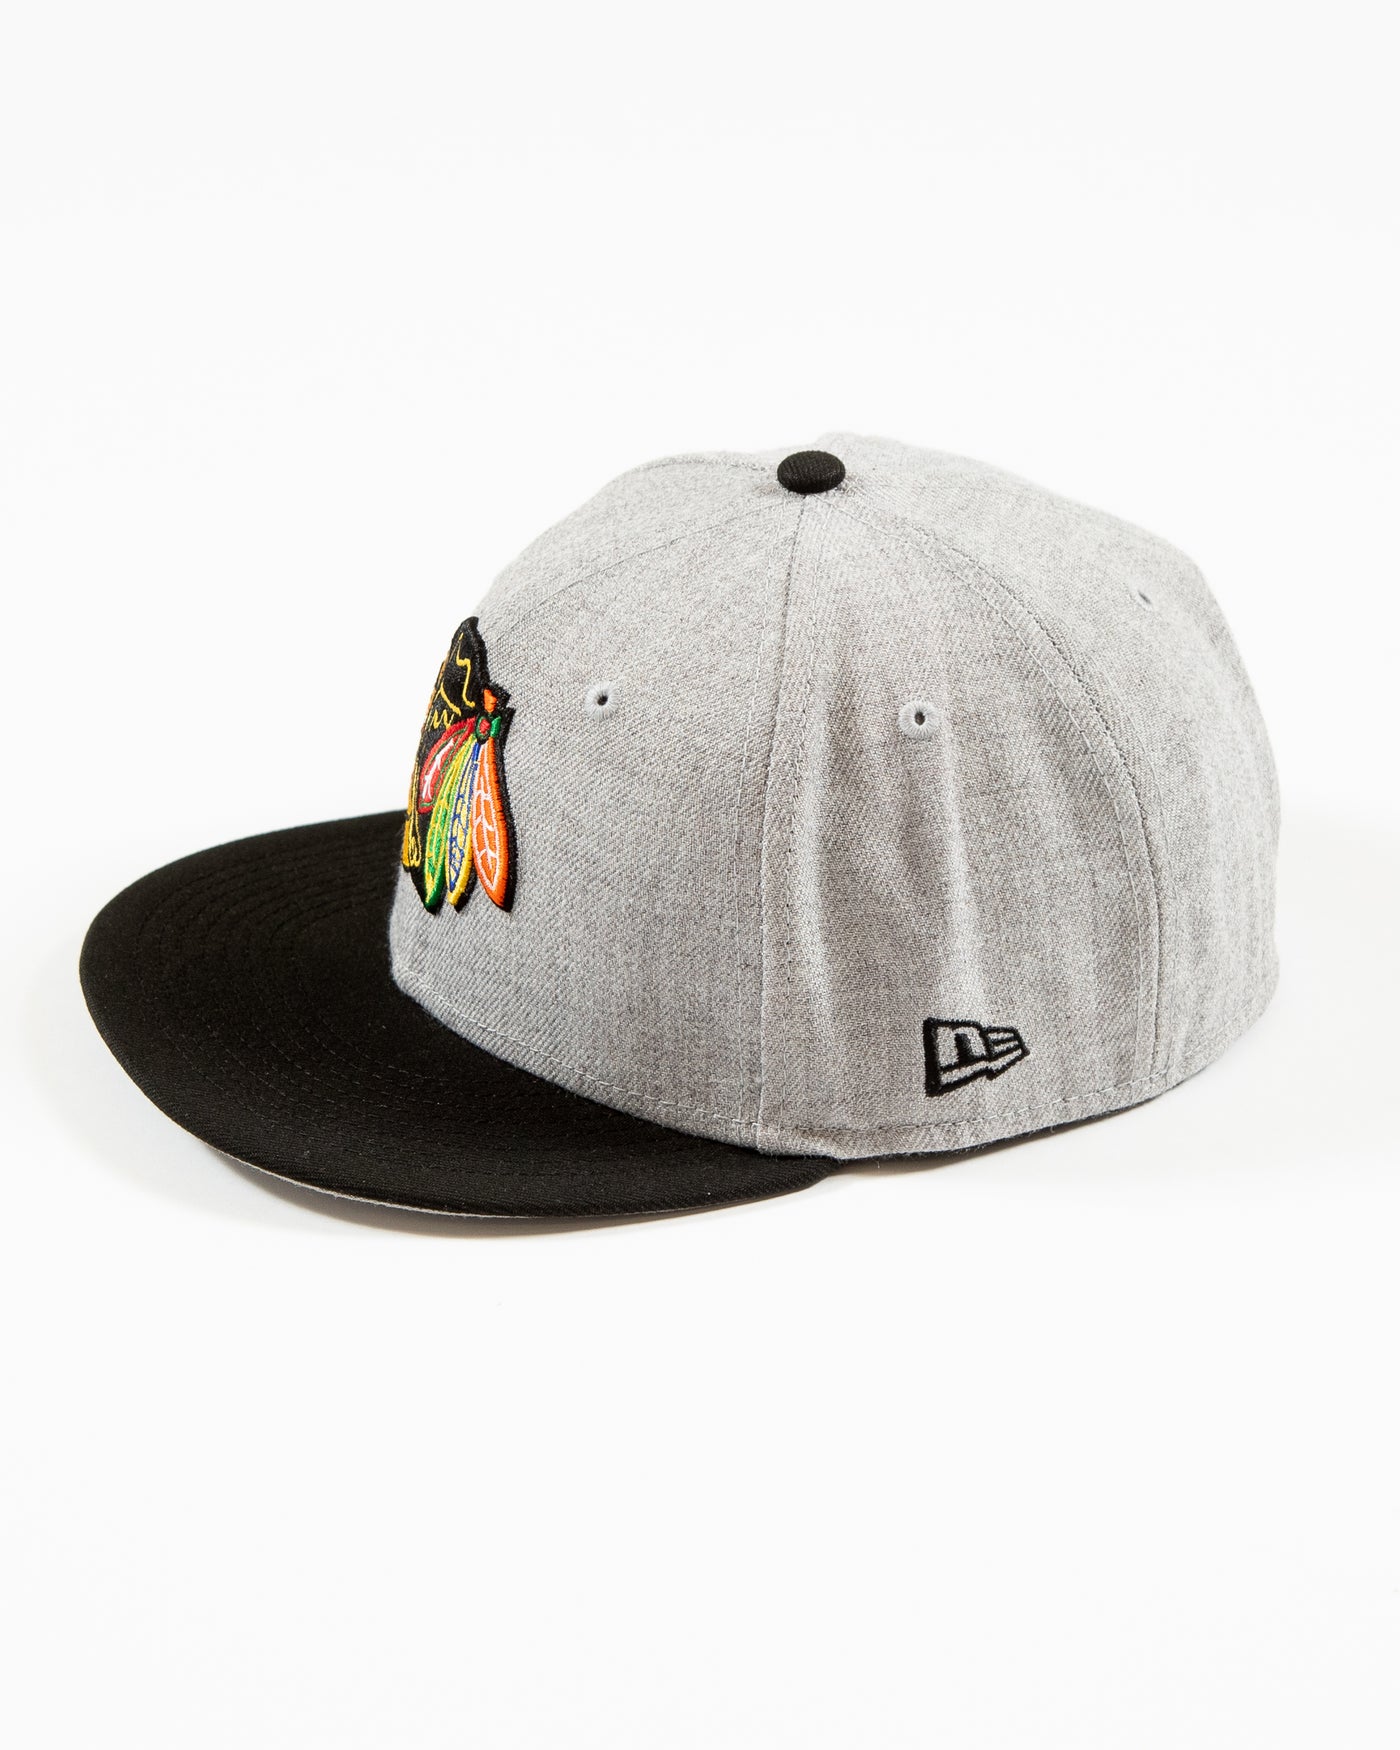 grey and black New Era 59FIFTY fitted cap with Chicago Blackhawks primary logo embroidered on front and patch adorning right side - left side lay flat